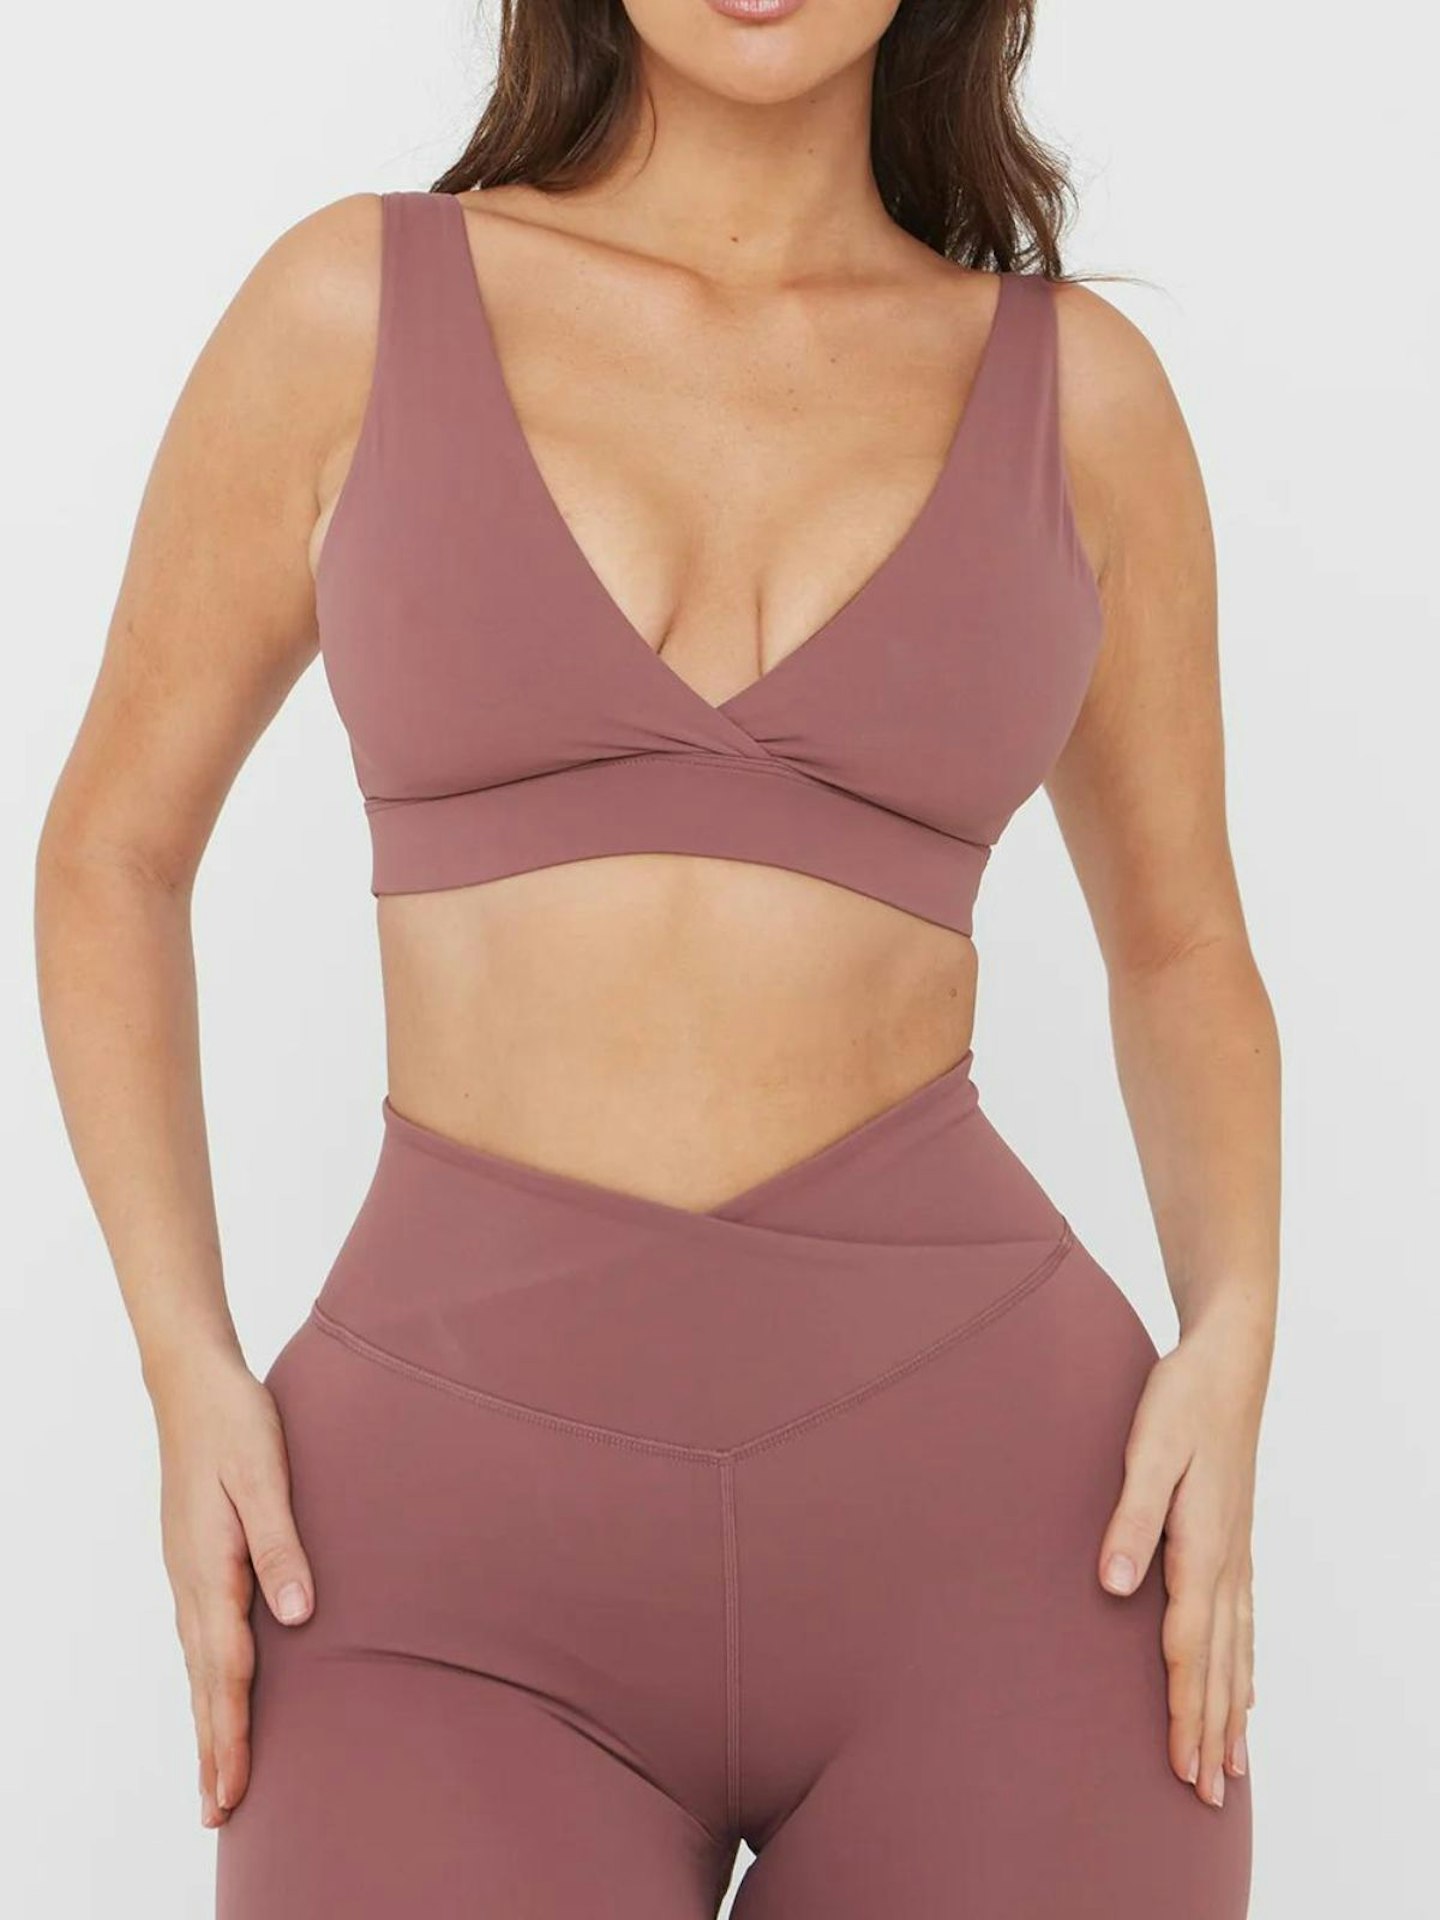 5 lululemon dupes from  that are worth a look! I've tested so many of  the highest rated lulu dupes and these are the FIVE best on